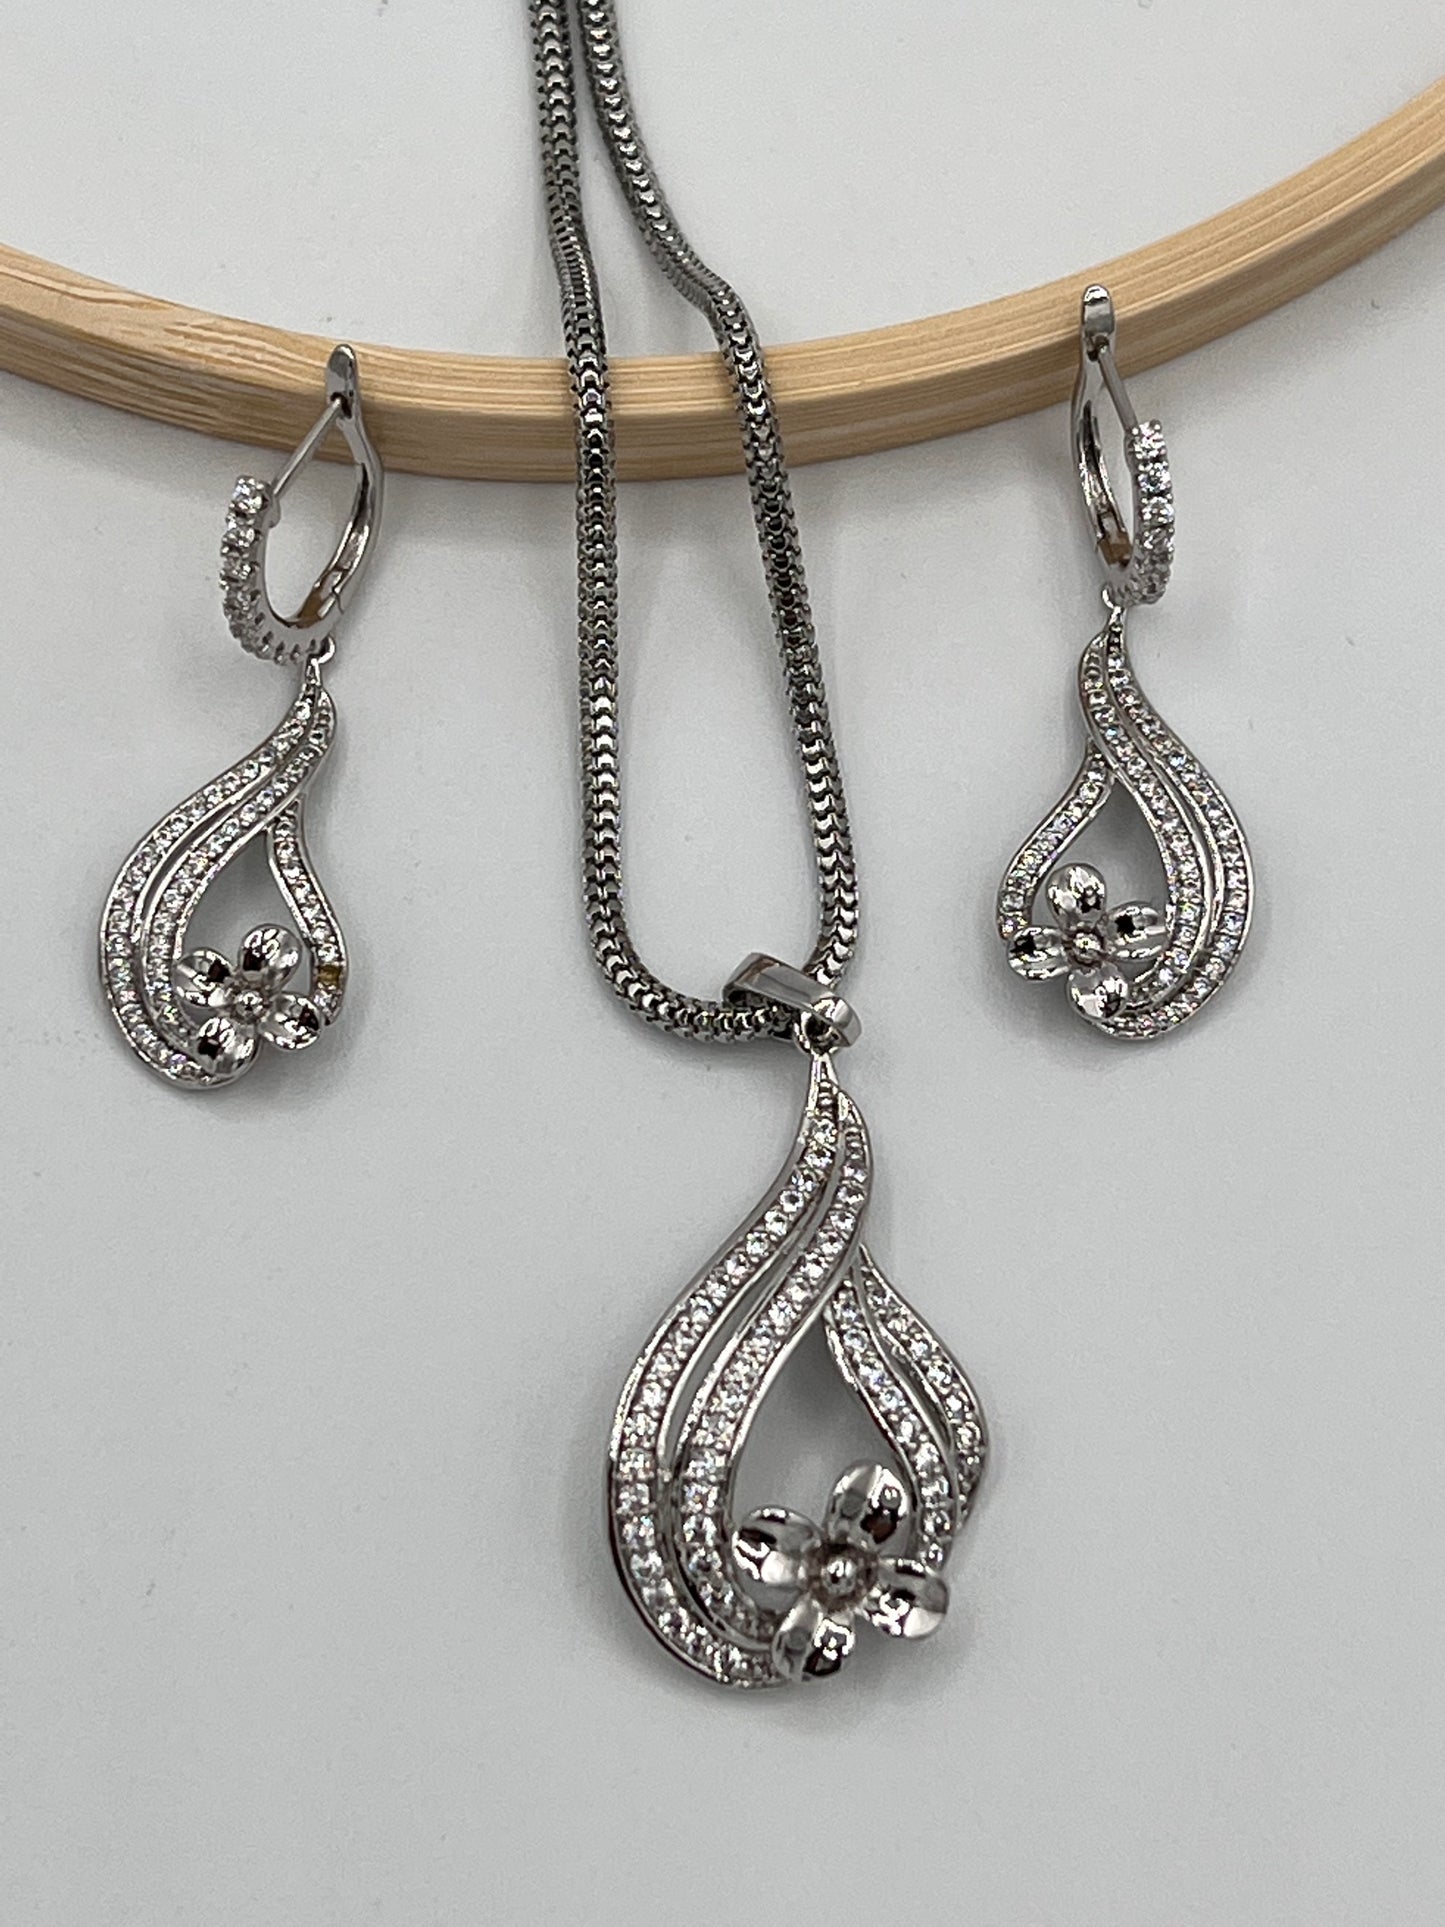 Ana Maria Silver Earrings and Necklace sets For Women